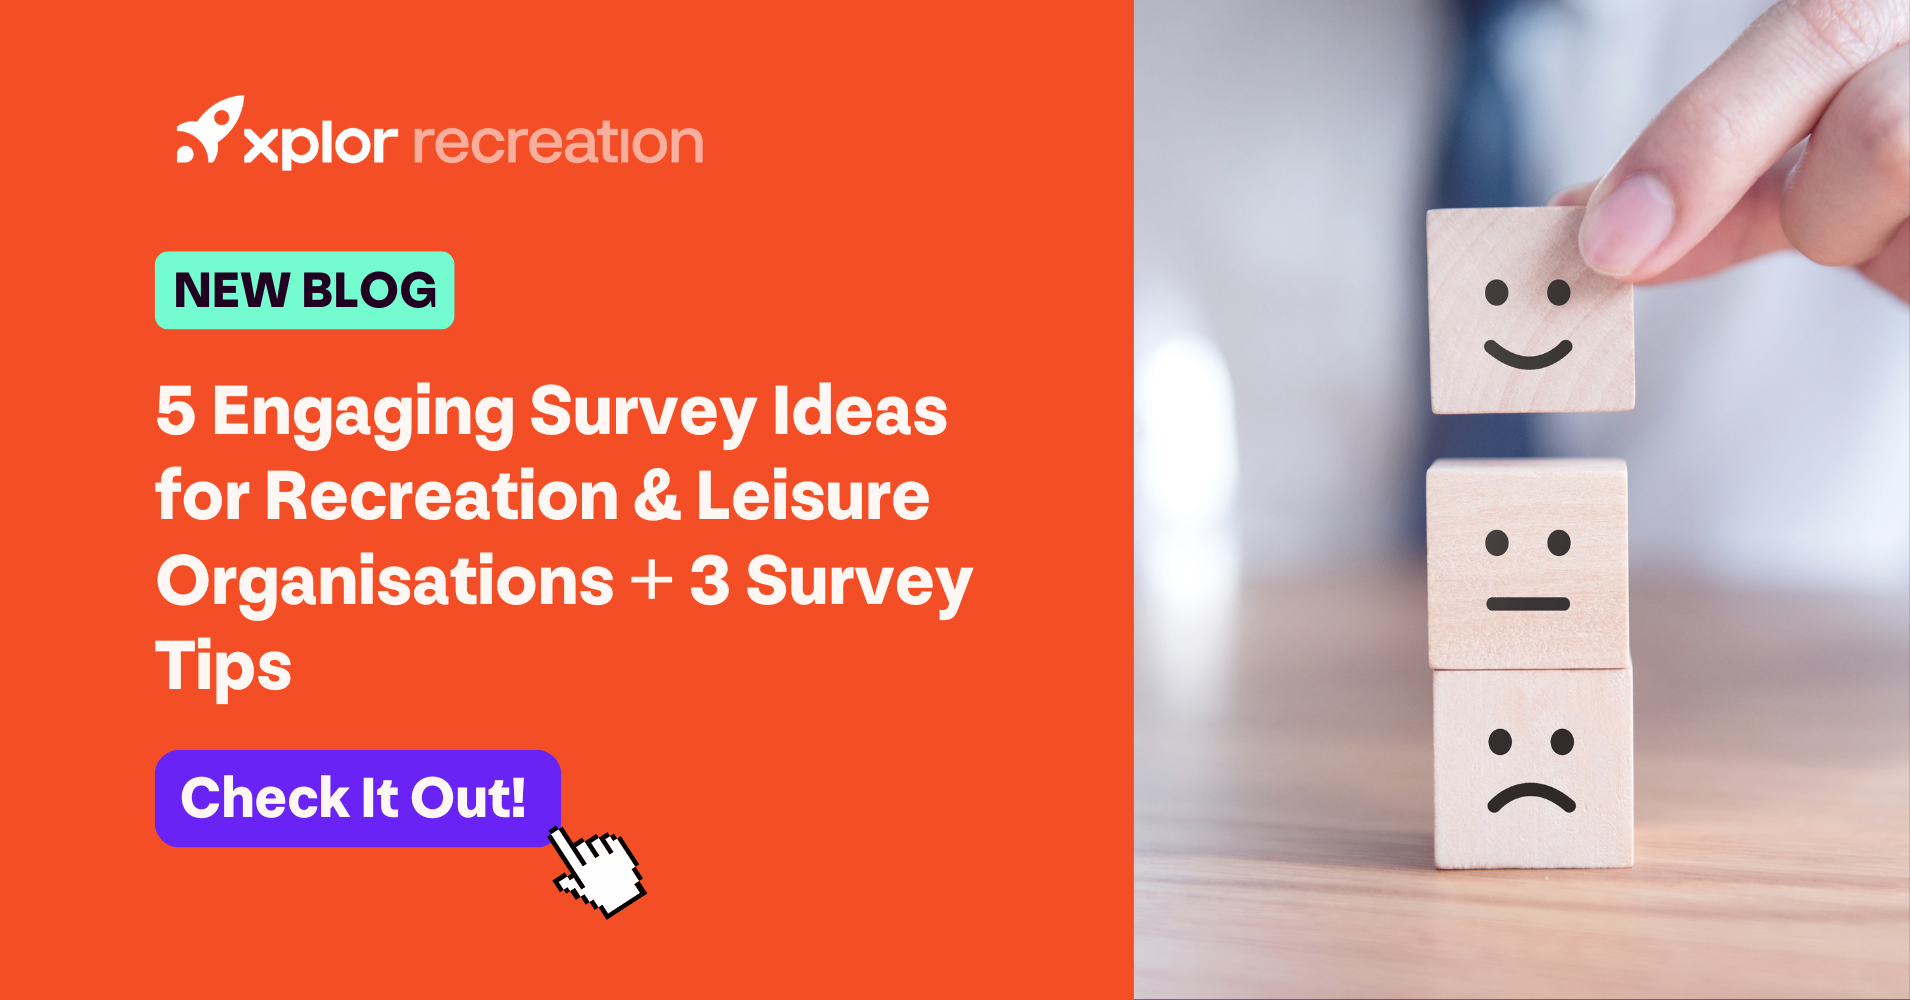 5 Engaging Survey Ideas for Leisure & Recreation Organisations + 3 Survey Tips